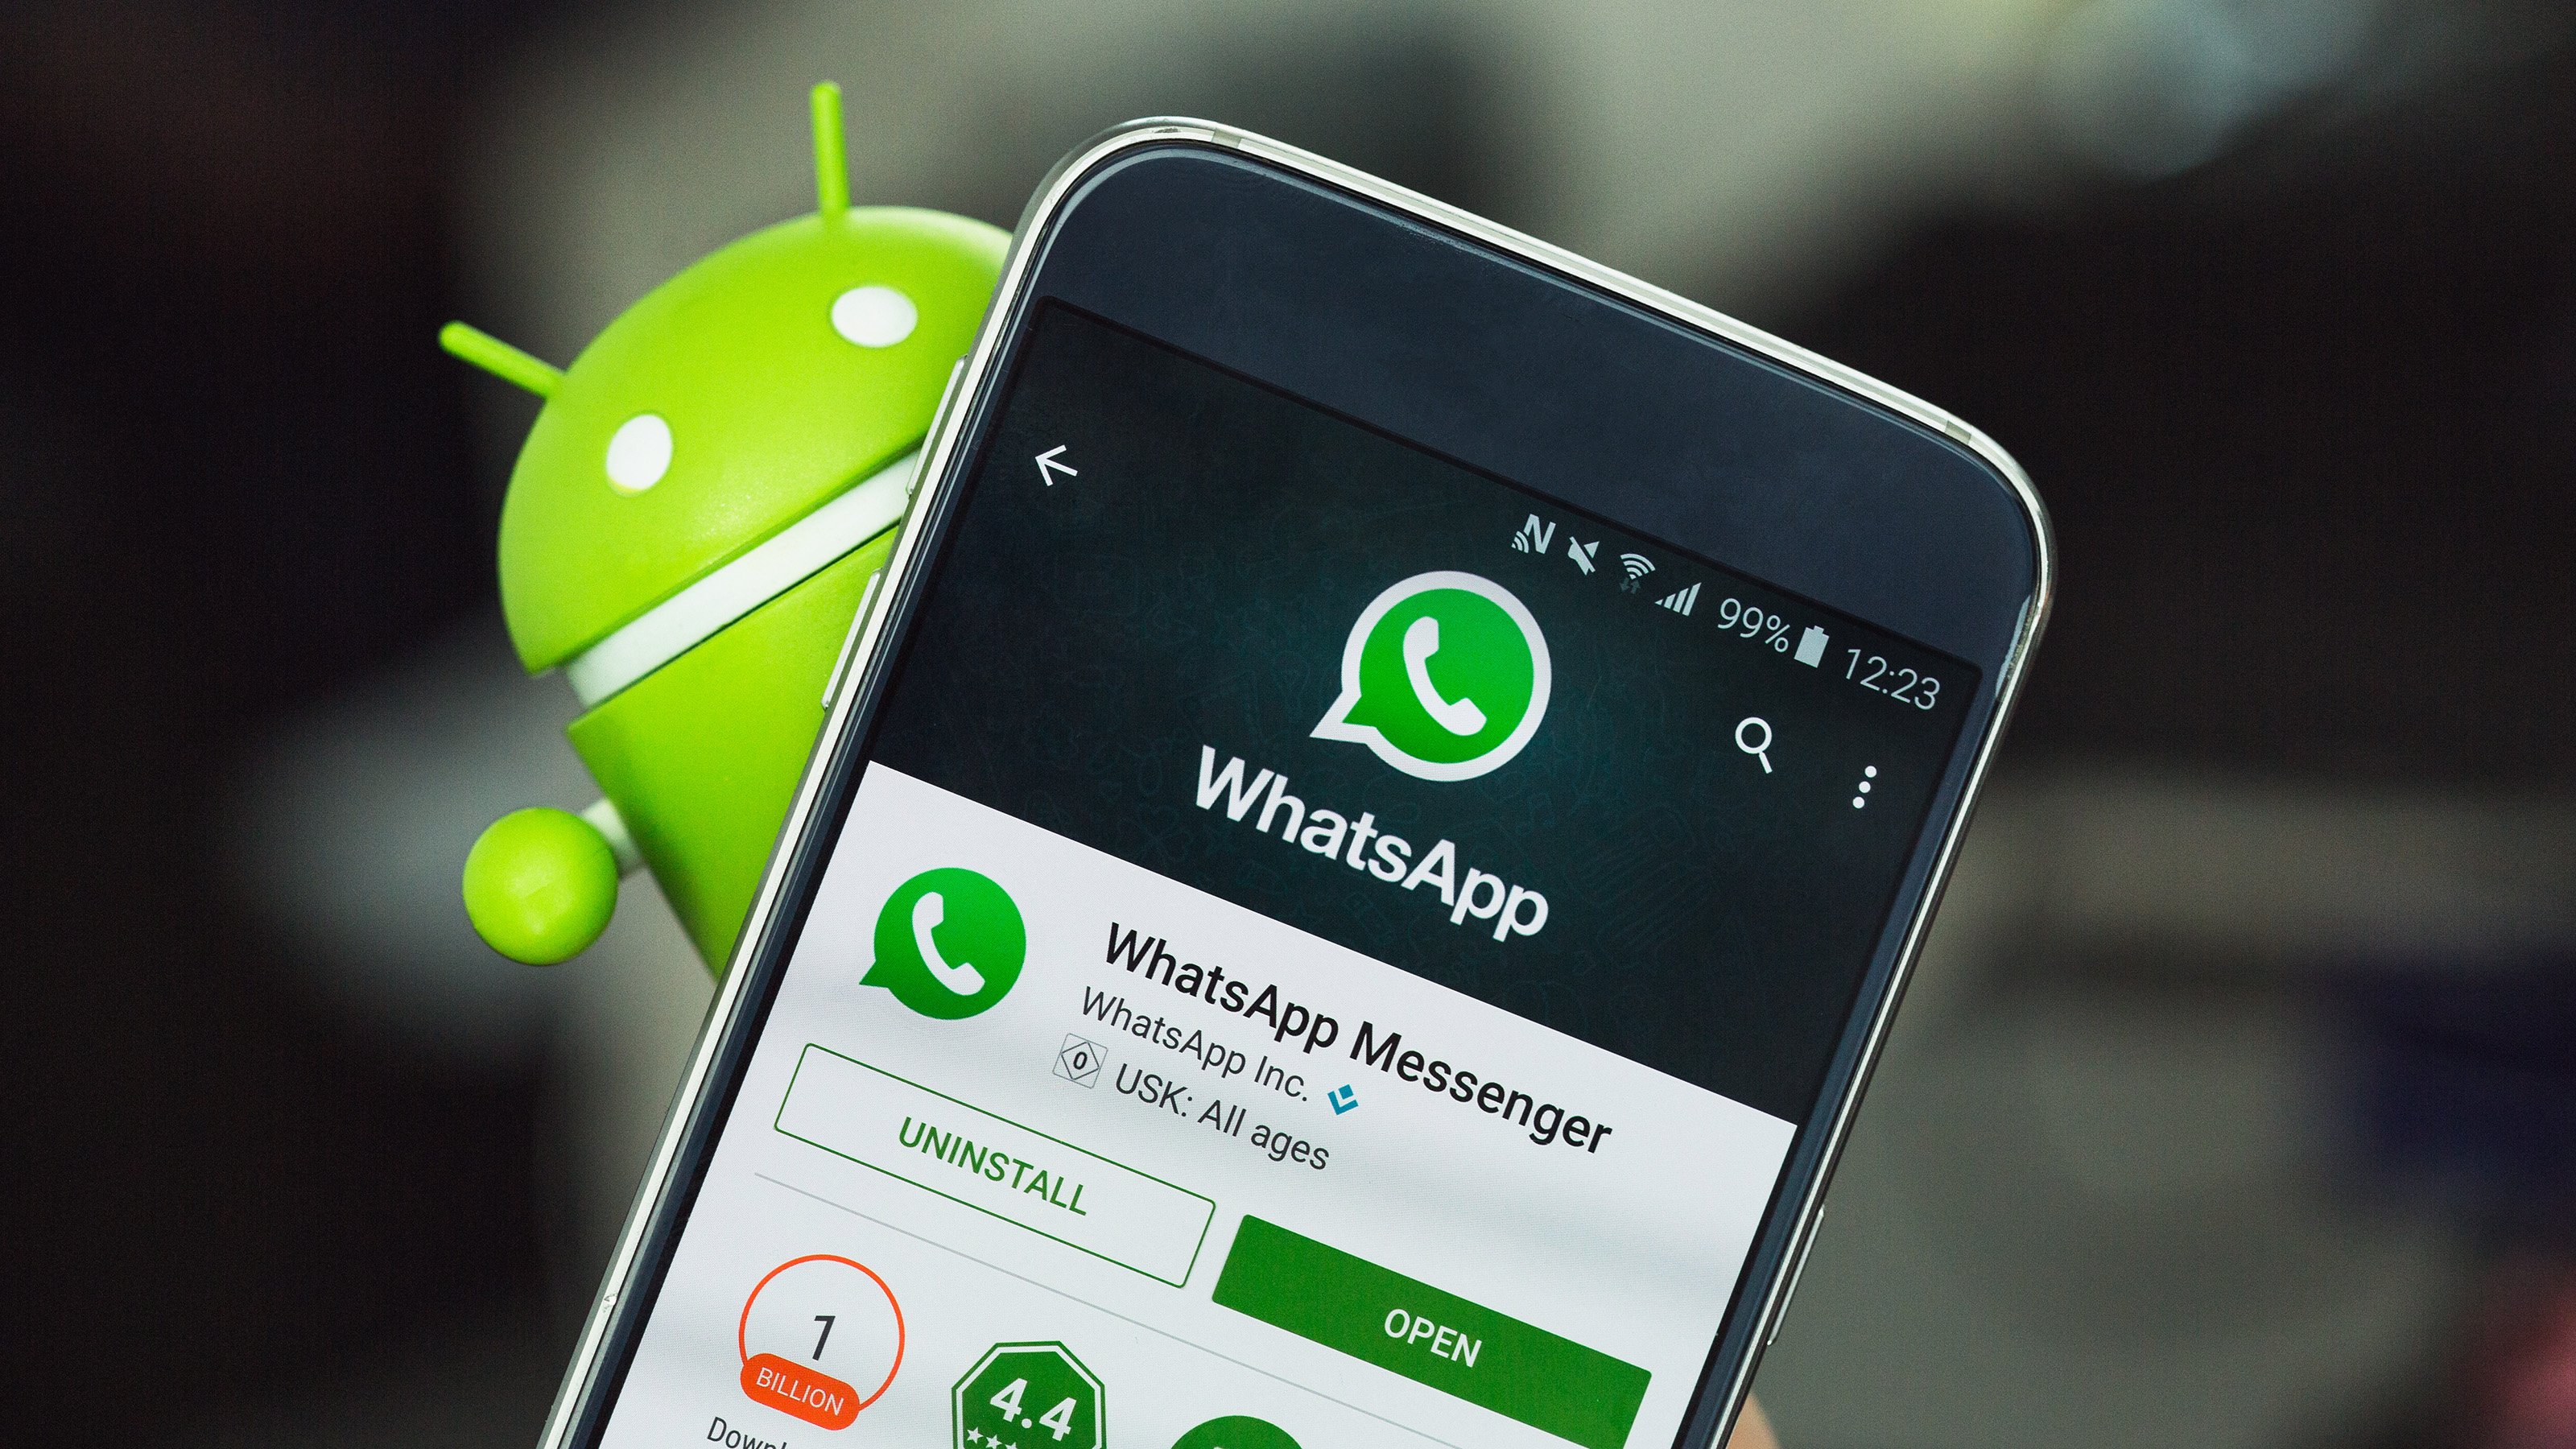 how to download photo from whatsapp android